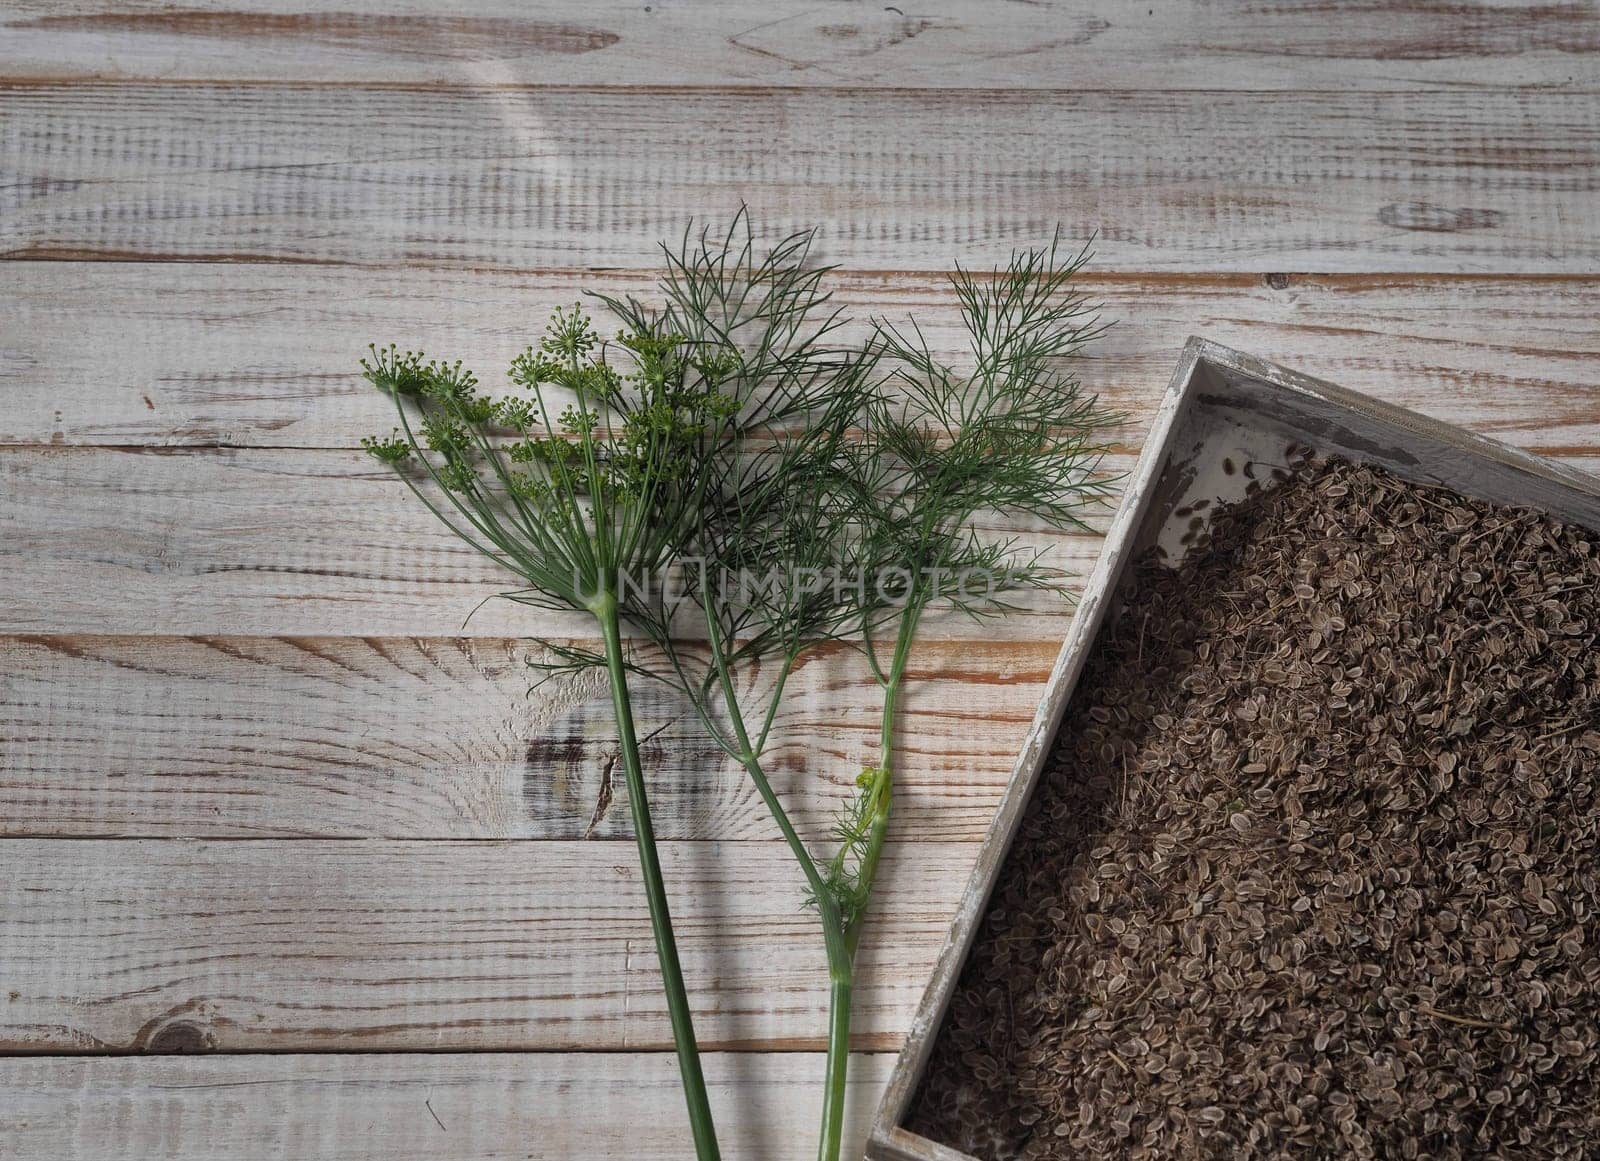 Background with a box of raw organic dill seeds with a green sprig of dill on a wooden table.